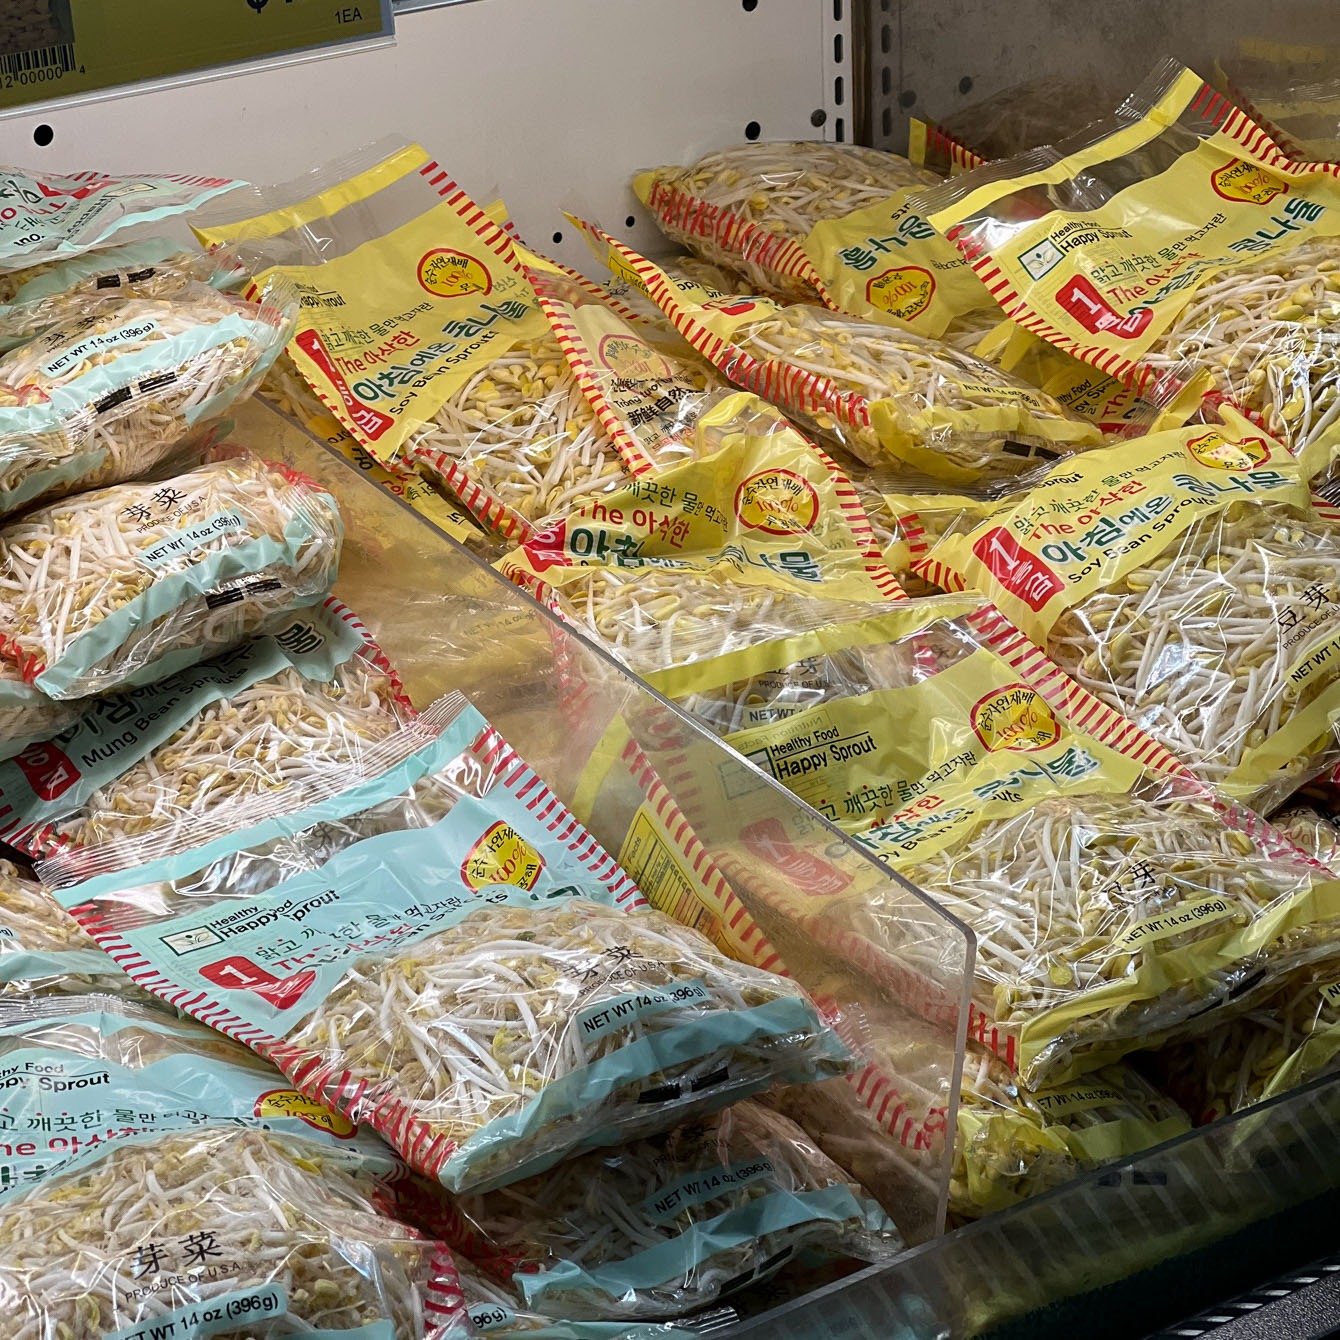 Soybean sprouts and mung bean sprouts are packaged on the shelf